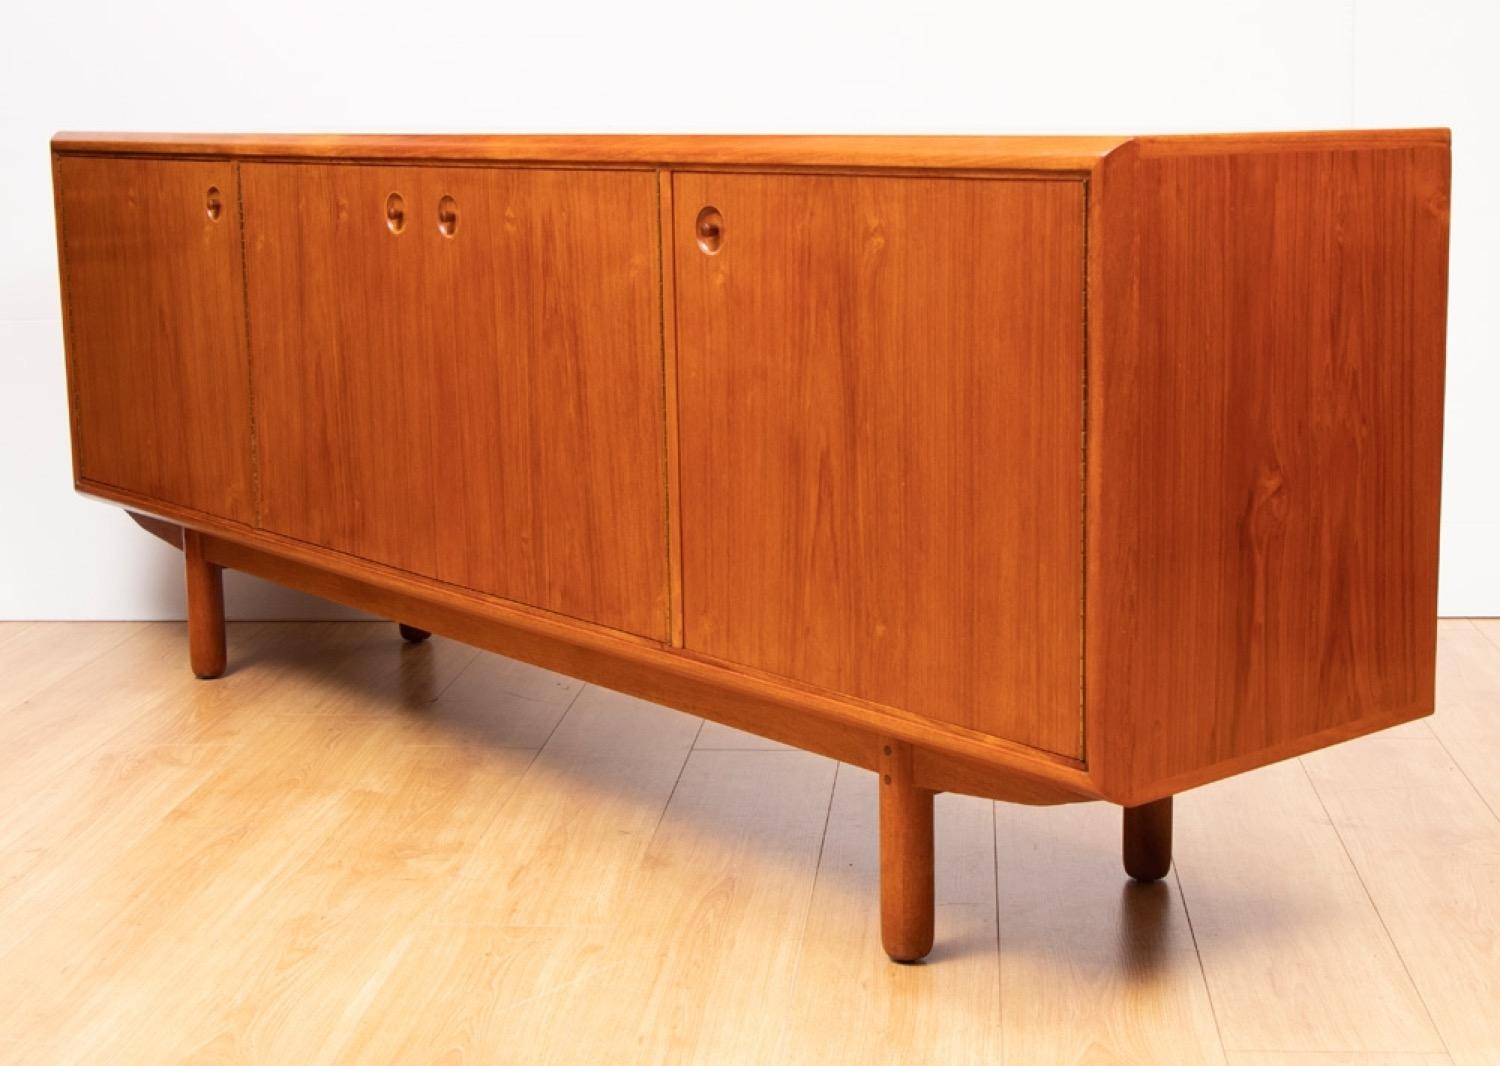 A very well made and solid large teak Danish sideboard which features four doors with feature recessed turned handles. The sideboard sits on four solid Teak turned legs. The left hand cupboard is split in two vertically with a storage space on the